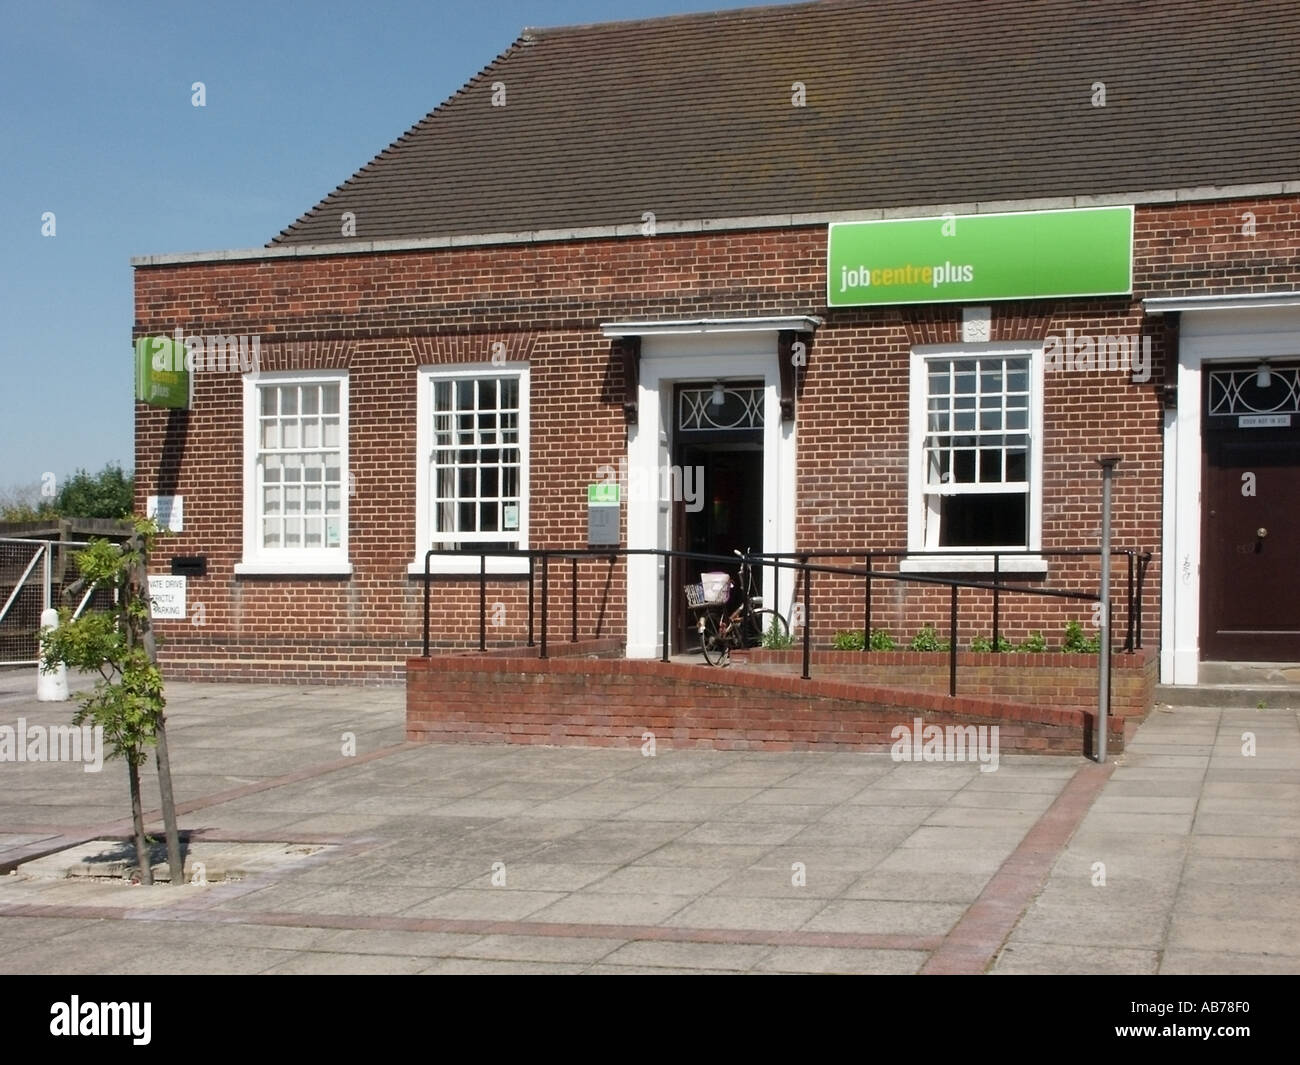 Rayleigh Job centre premises for checking employment vacancies Stock Photo